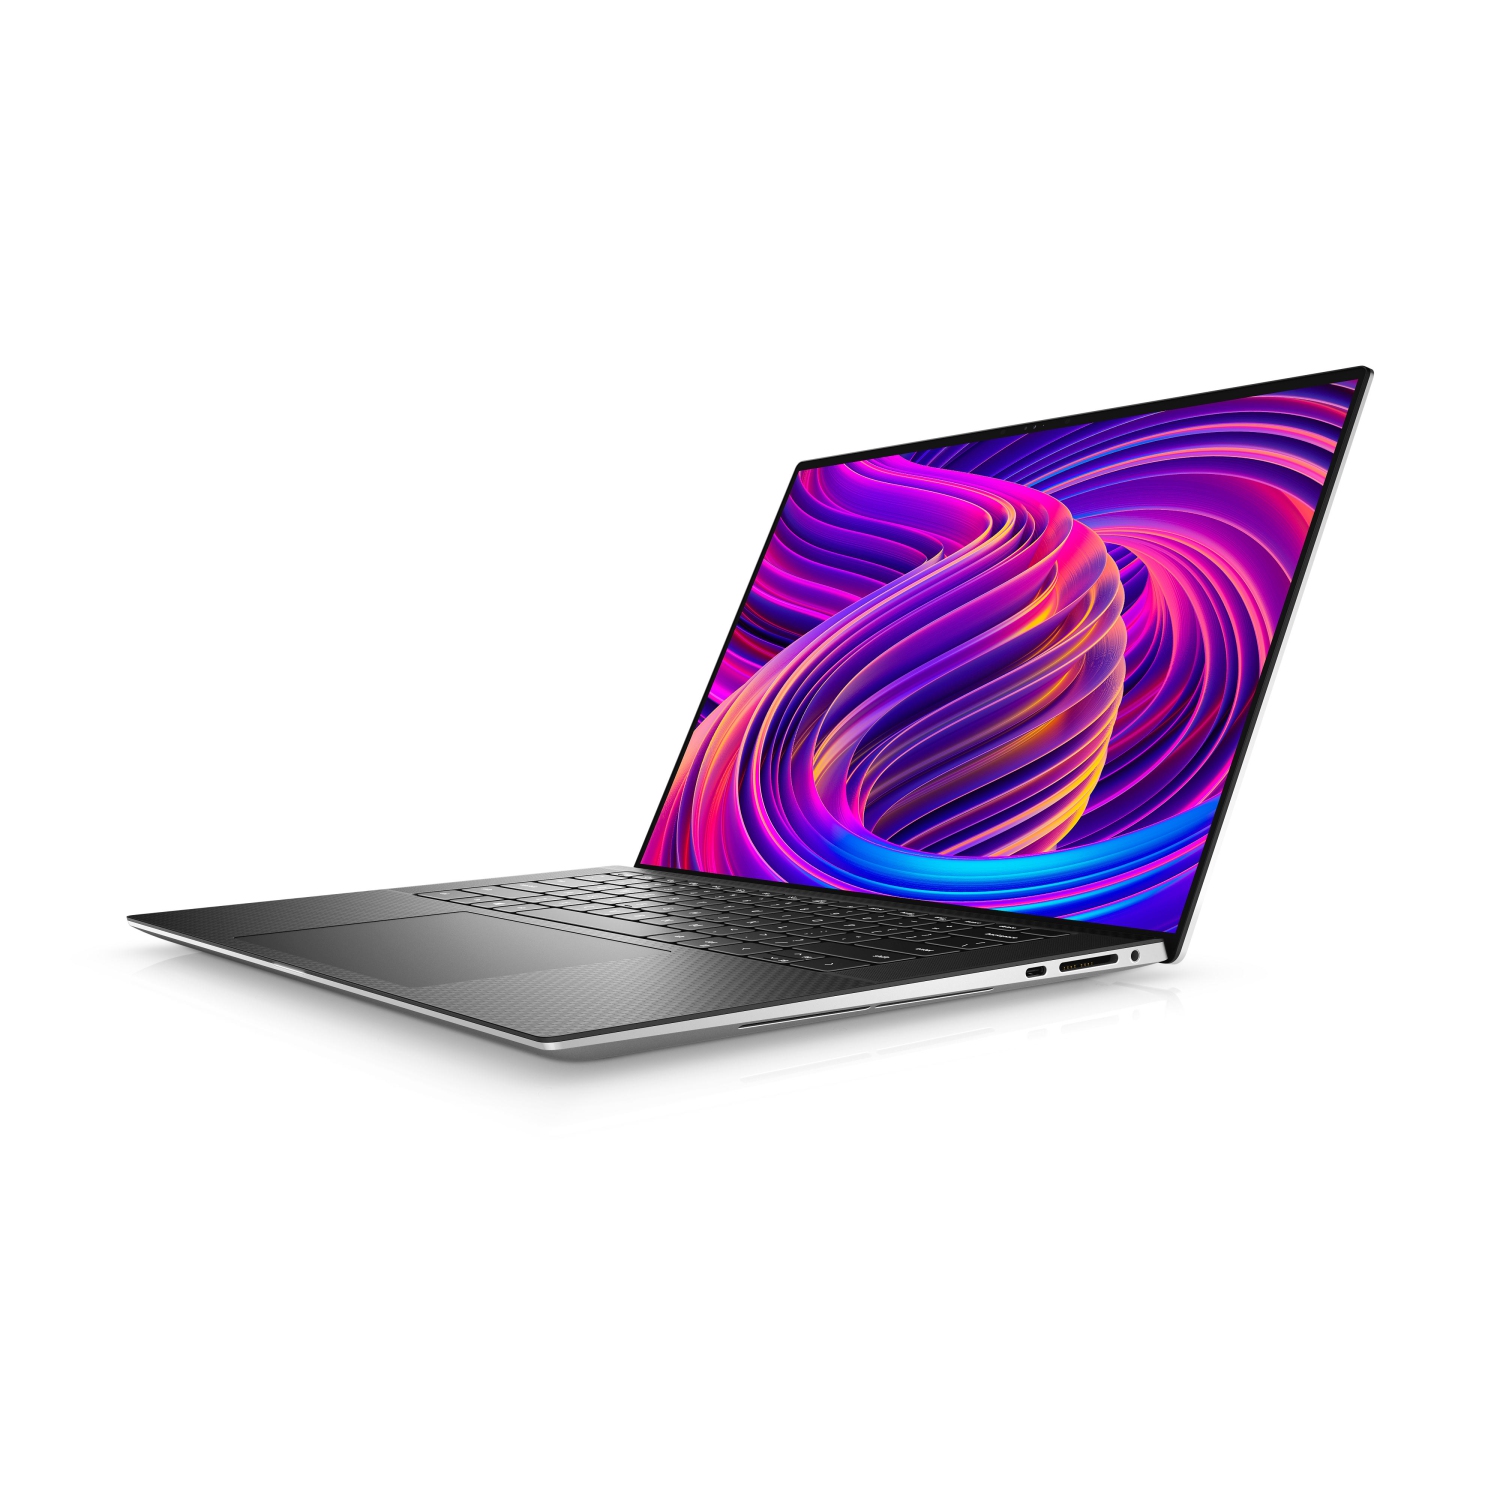 Refurbished (Excellent) - Dell XPS 15 9510 Laptop (2021) | 15.6" FHD+ | Core i7 - 1TB SSD - 16GB RAM - 3050 Ti | 8 Cores @ 4.6 GHz - 11th Gen CPU Certified Refurbished